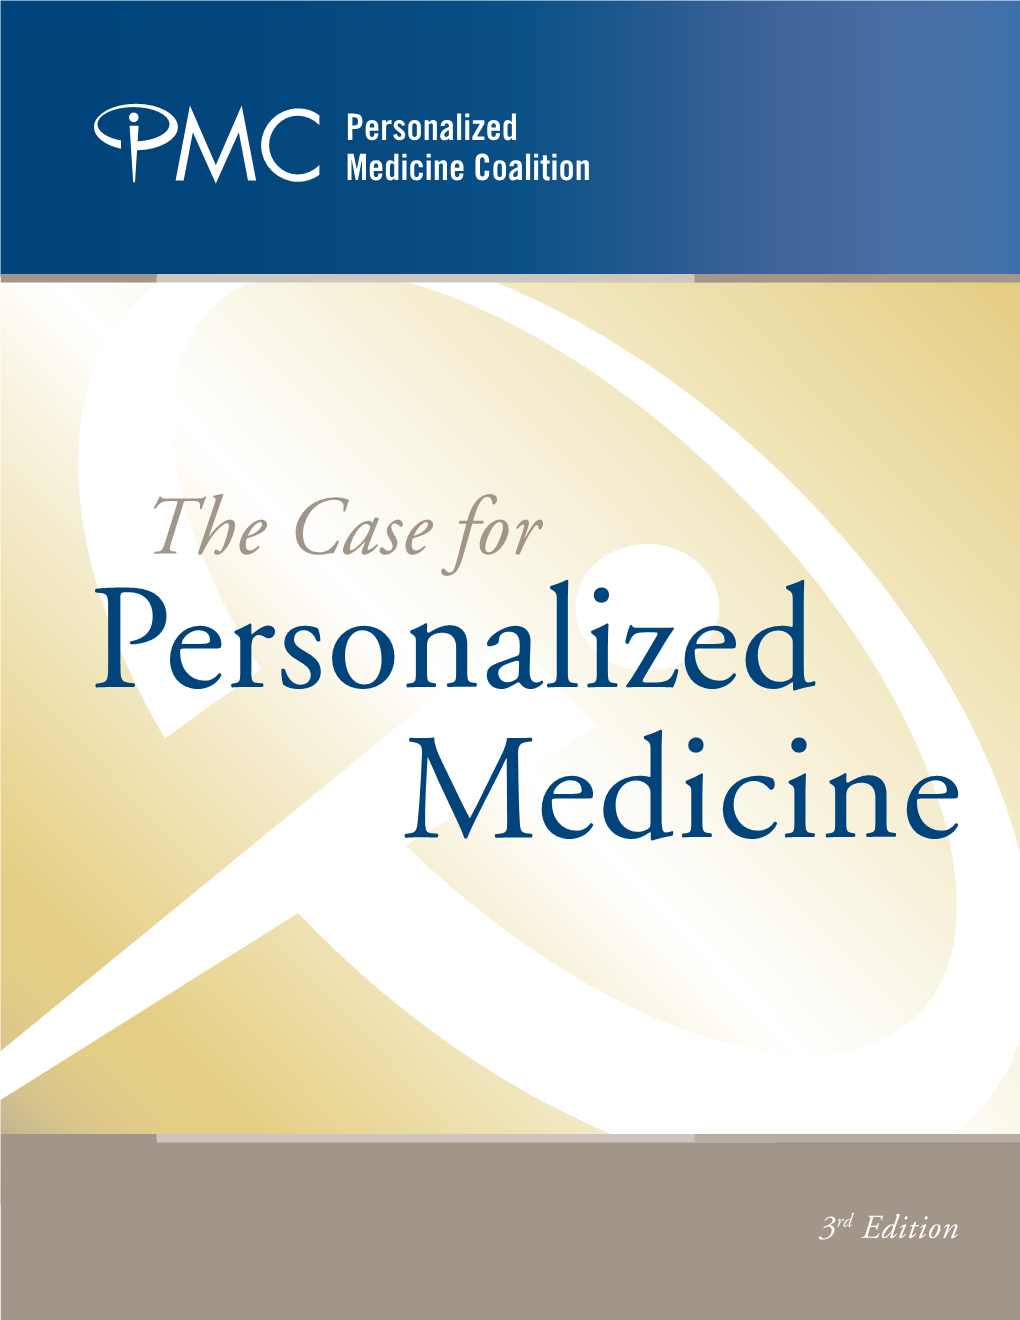 The Case for Personalized Medicine